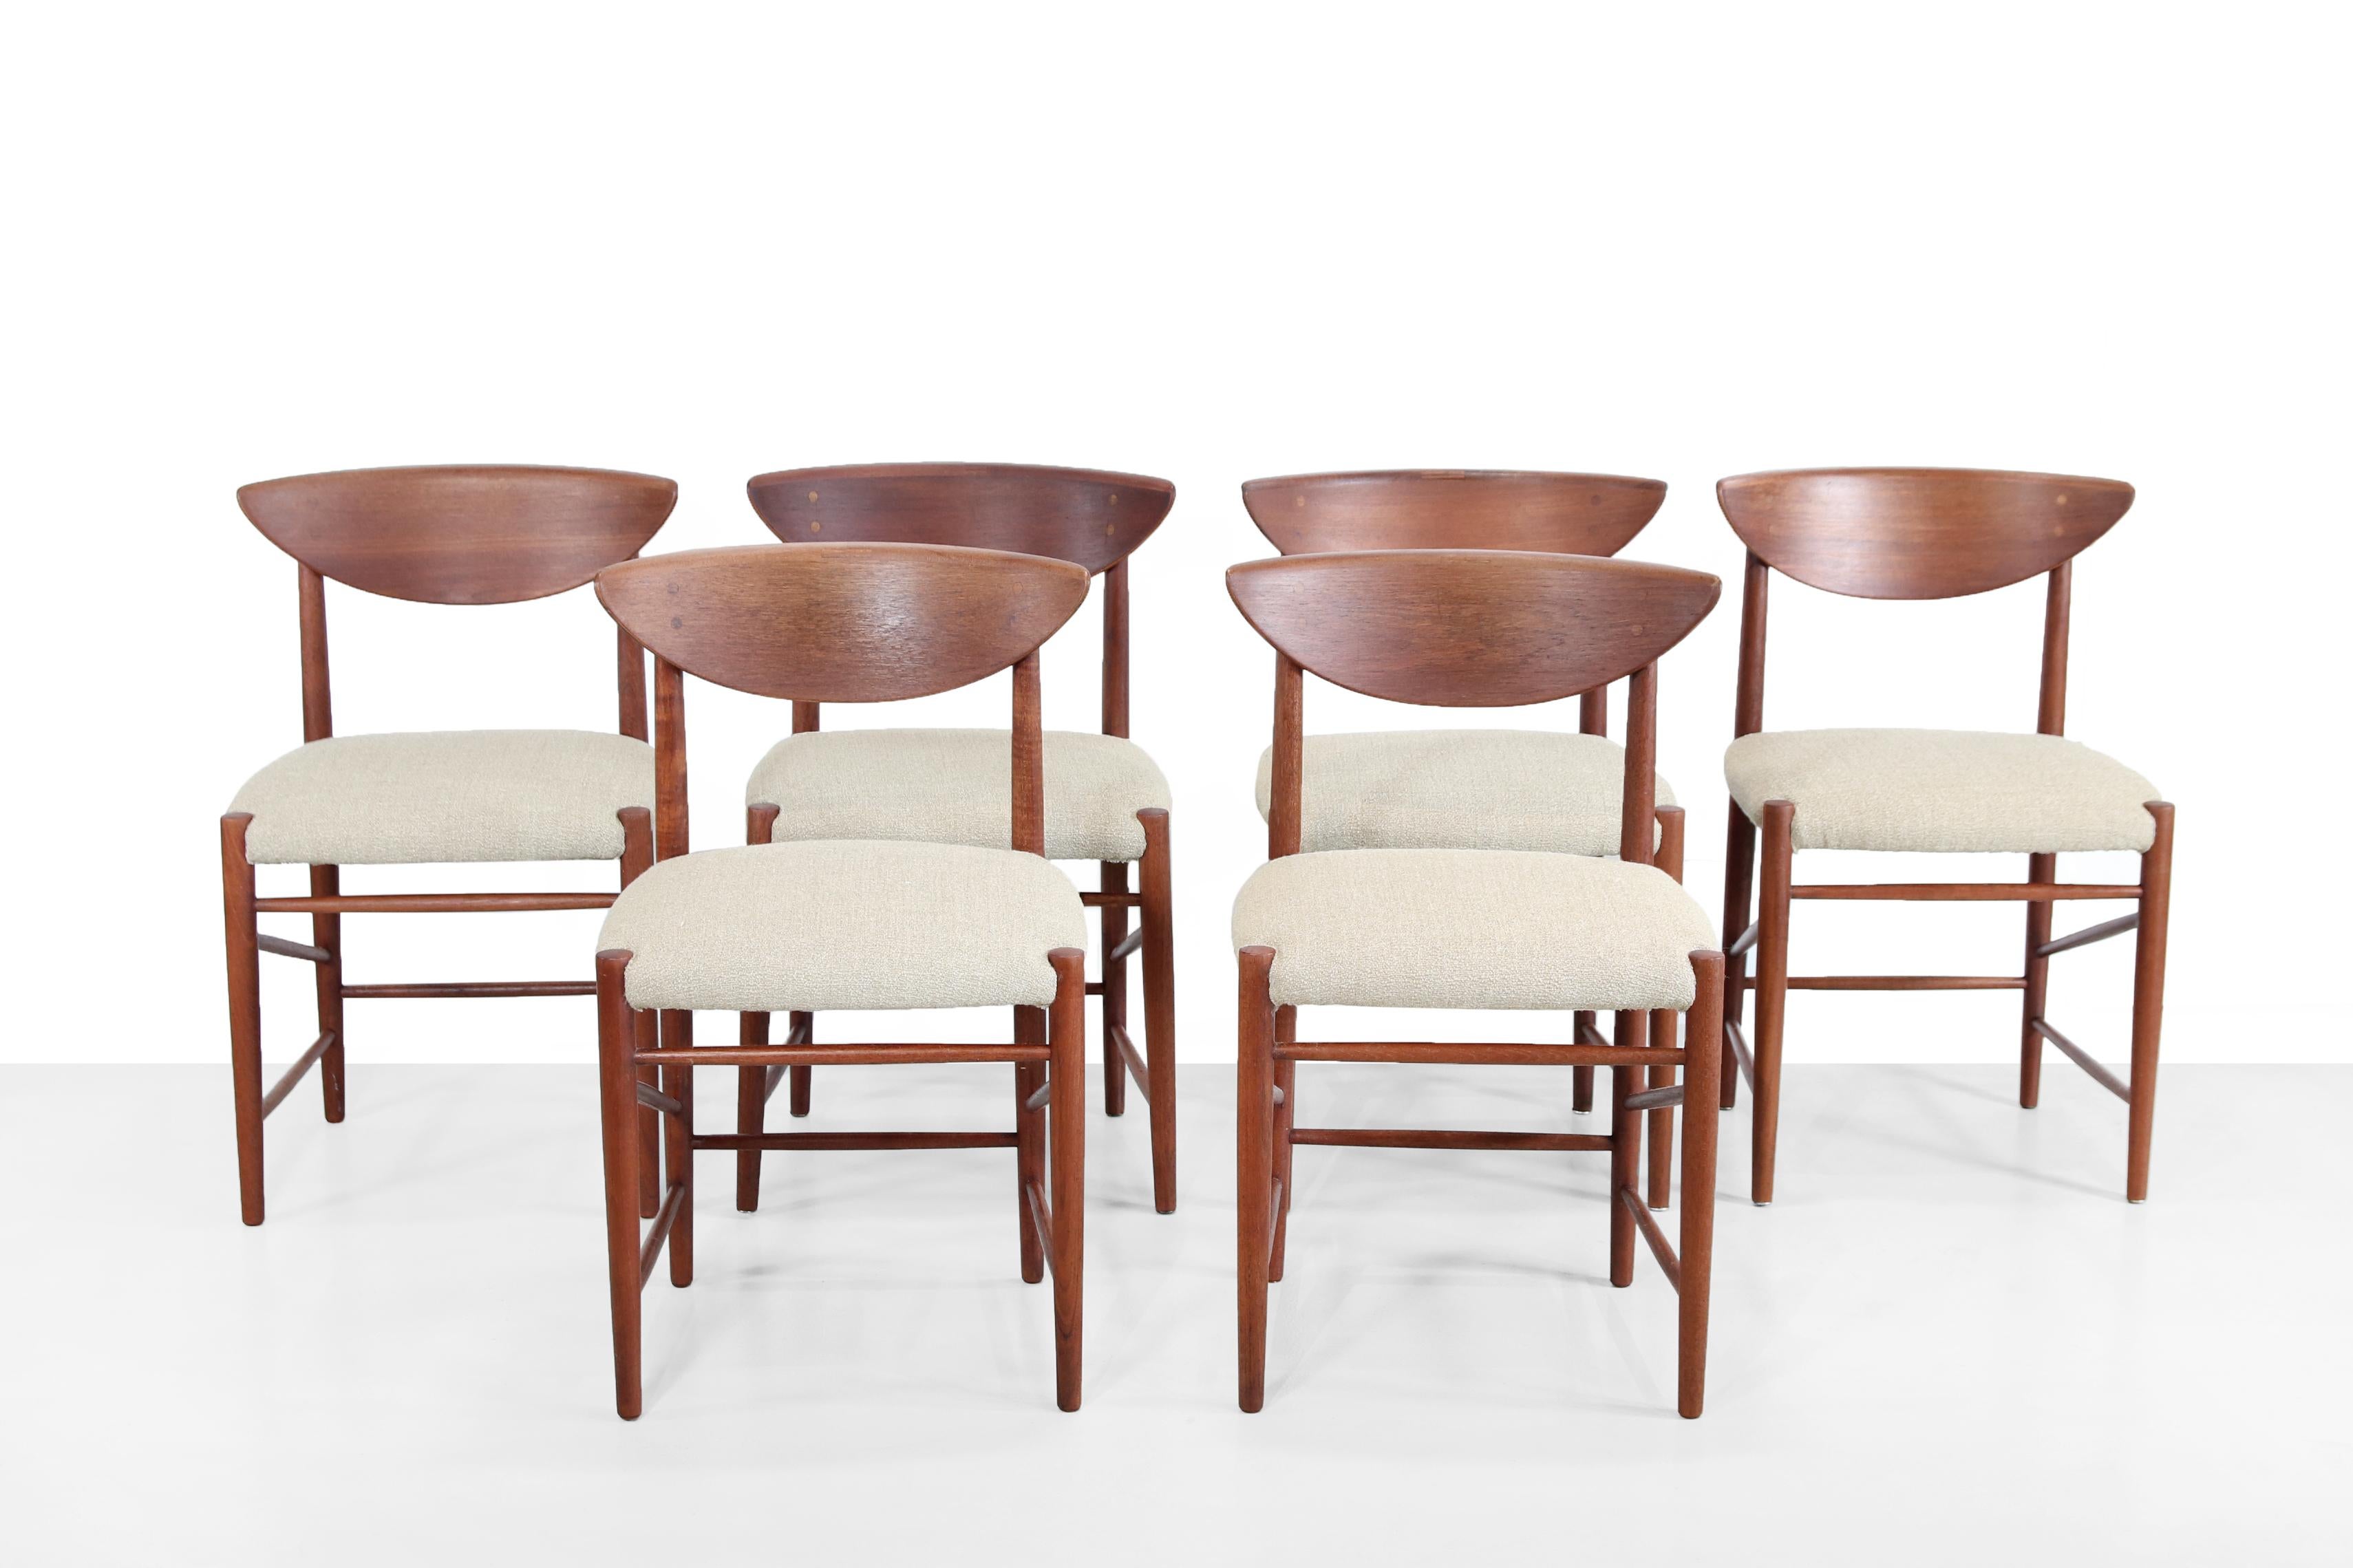 Set of 6 teak model 316 chairs designed by Peter Hvidt and Orla Molgaard Nielsen in Denmark, 1955. These chairs feature a solid teak frame and have been upholstered in a natural high quality furniture fabric. They have a very soft and comfortable